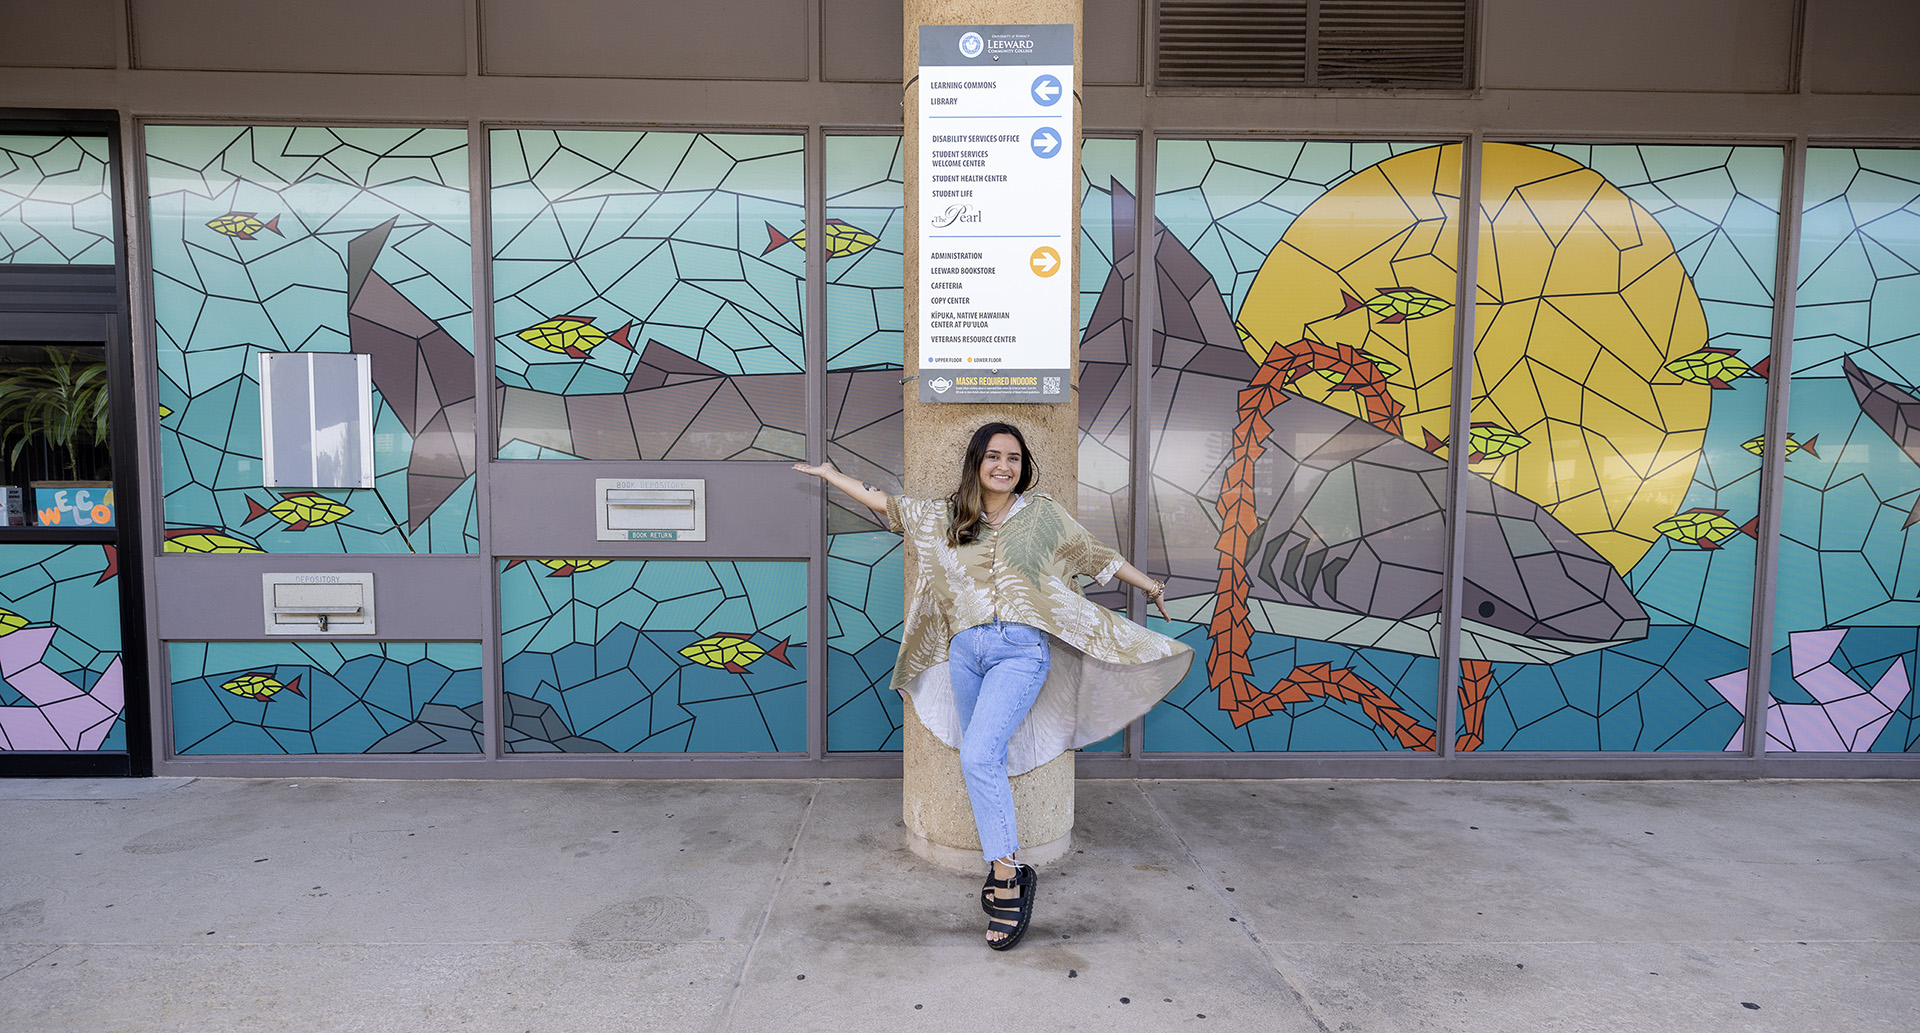 Taylor Wilson in front of her mural at Learning Commons, Nā Kiaʻi o Puʻuloa (The Protectors of Puʻuloa)